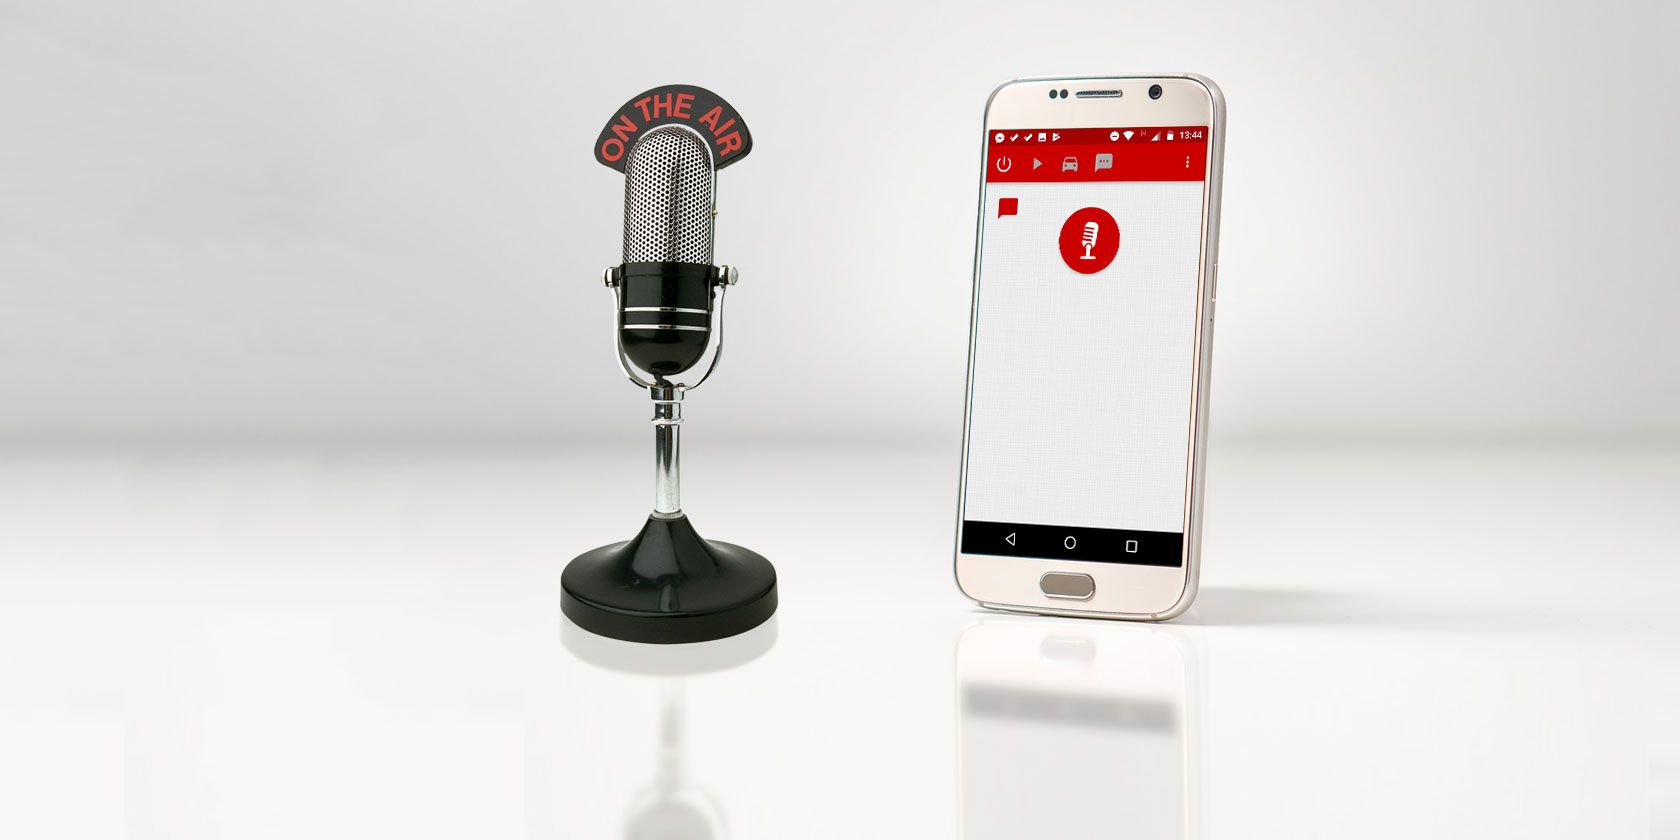 which smartphone has the best voice recognition software